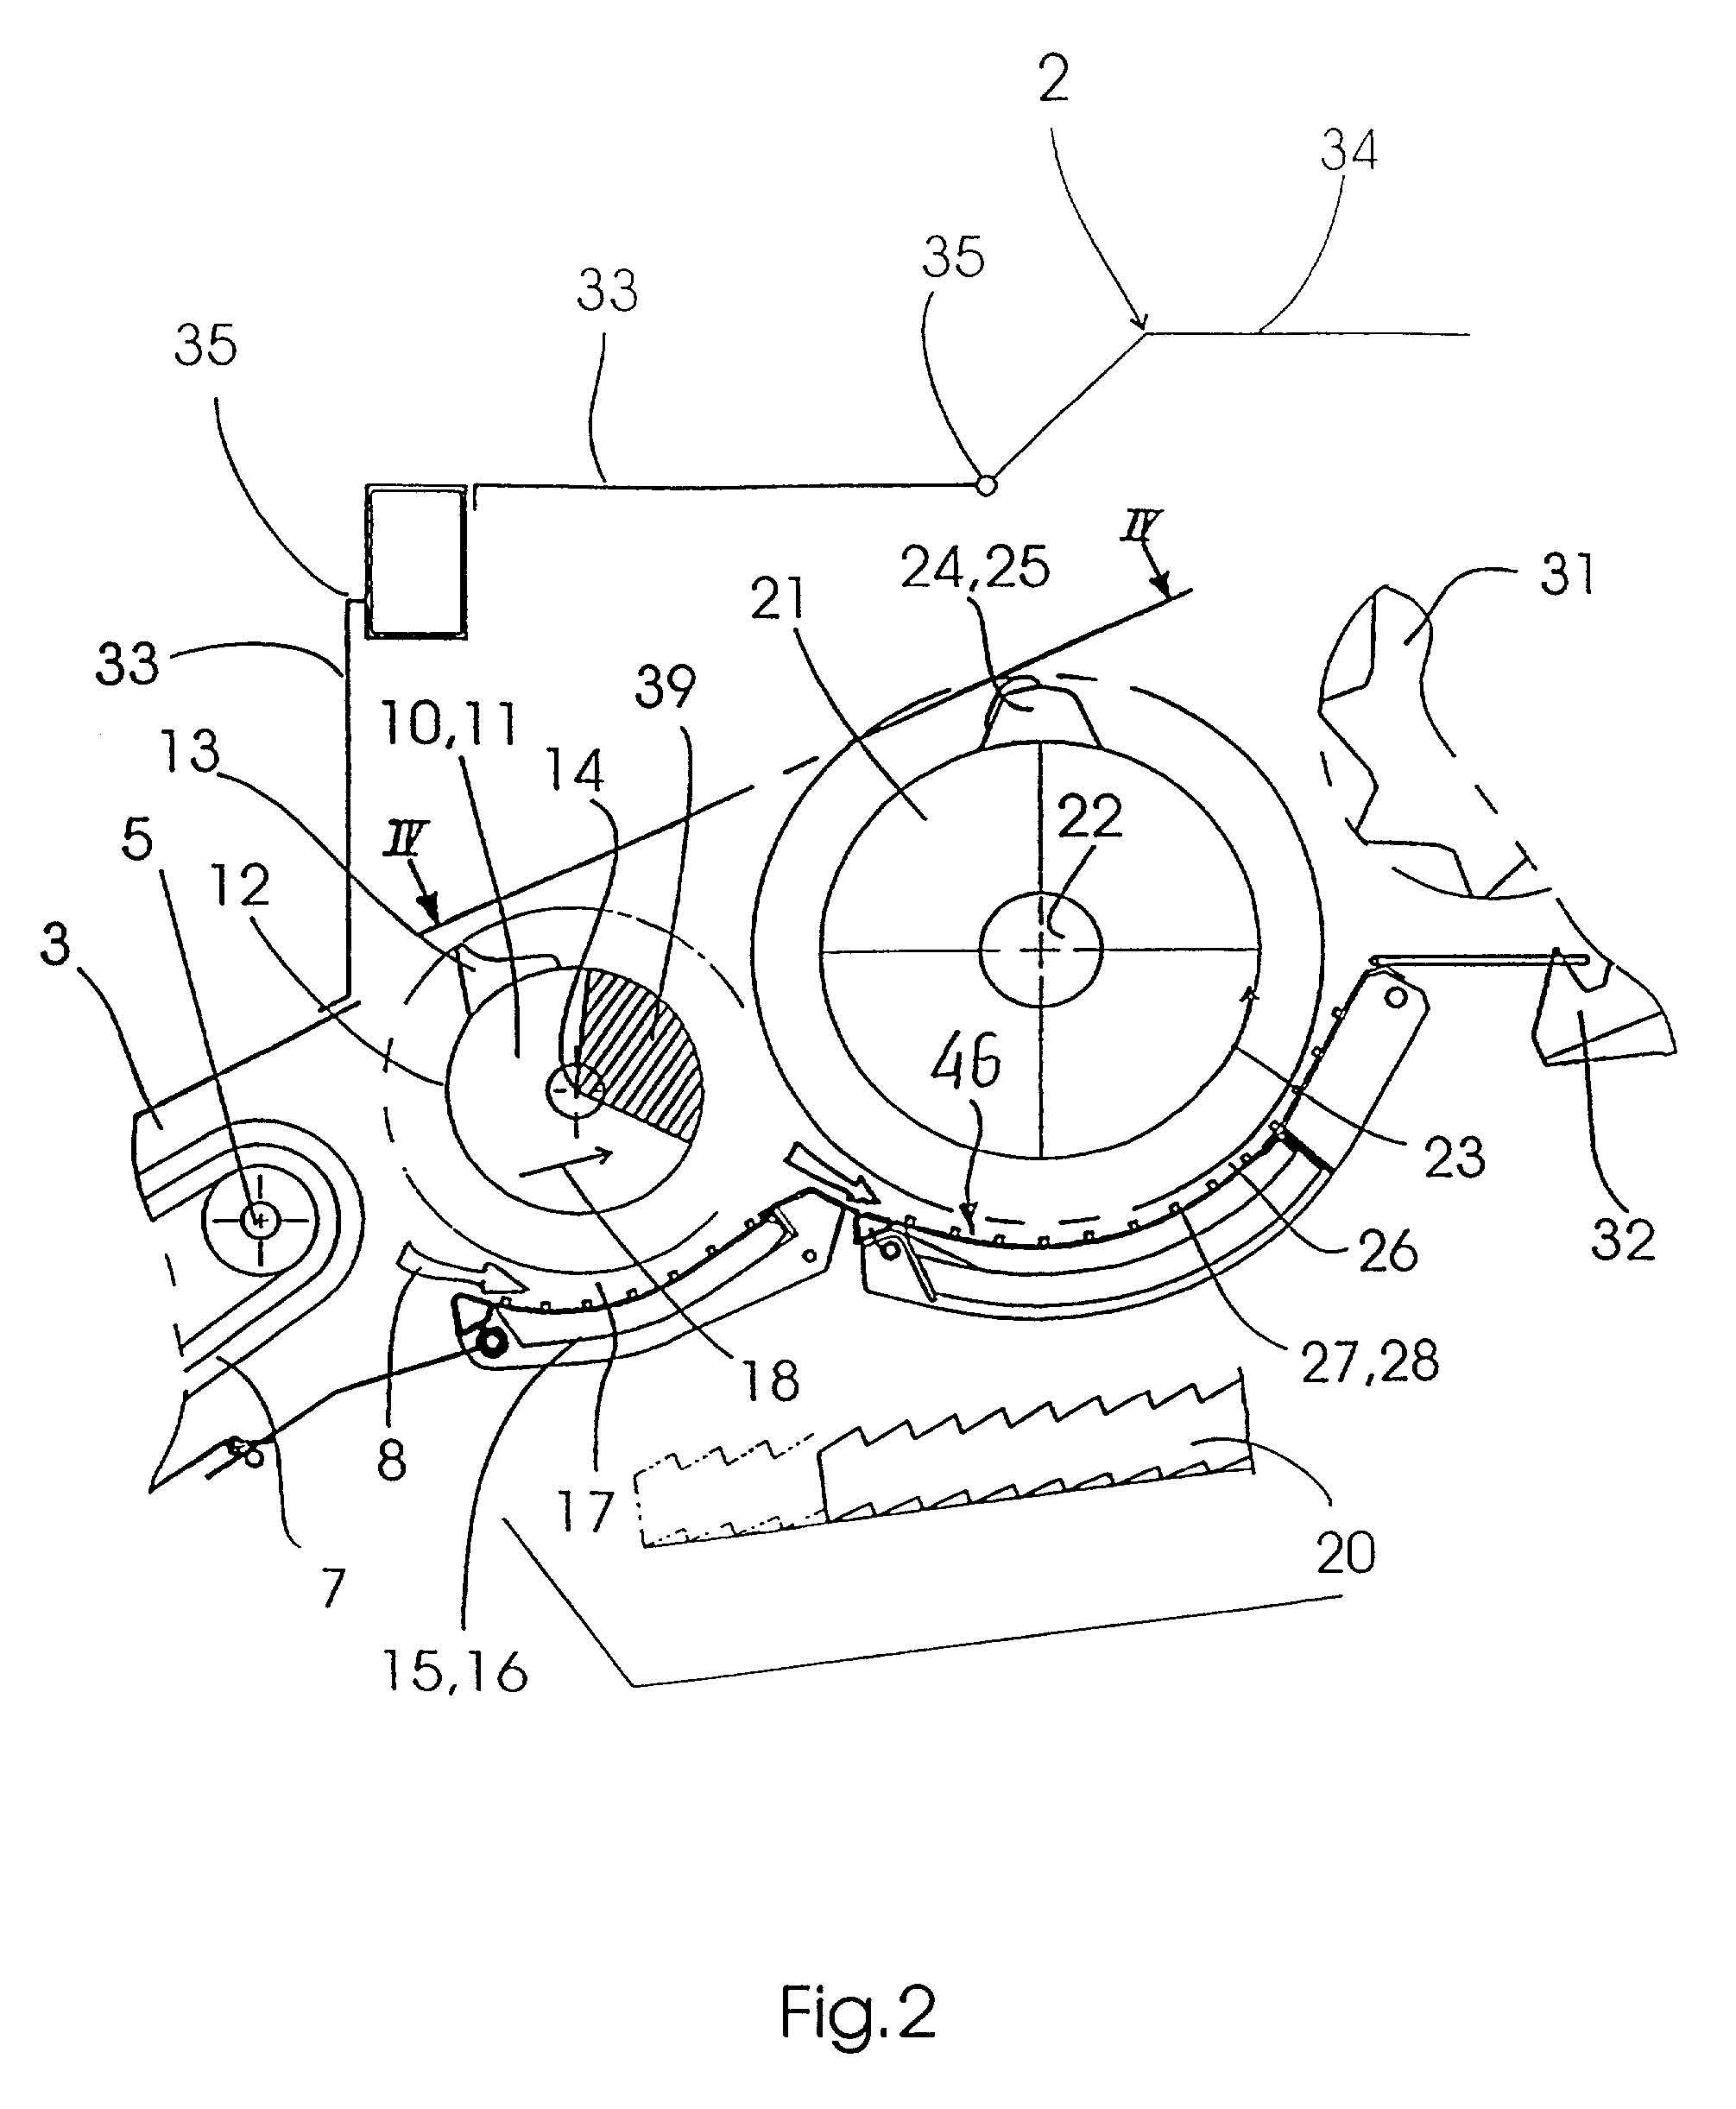 Releasable segment in the working members of an agricultural harvesting machine